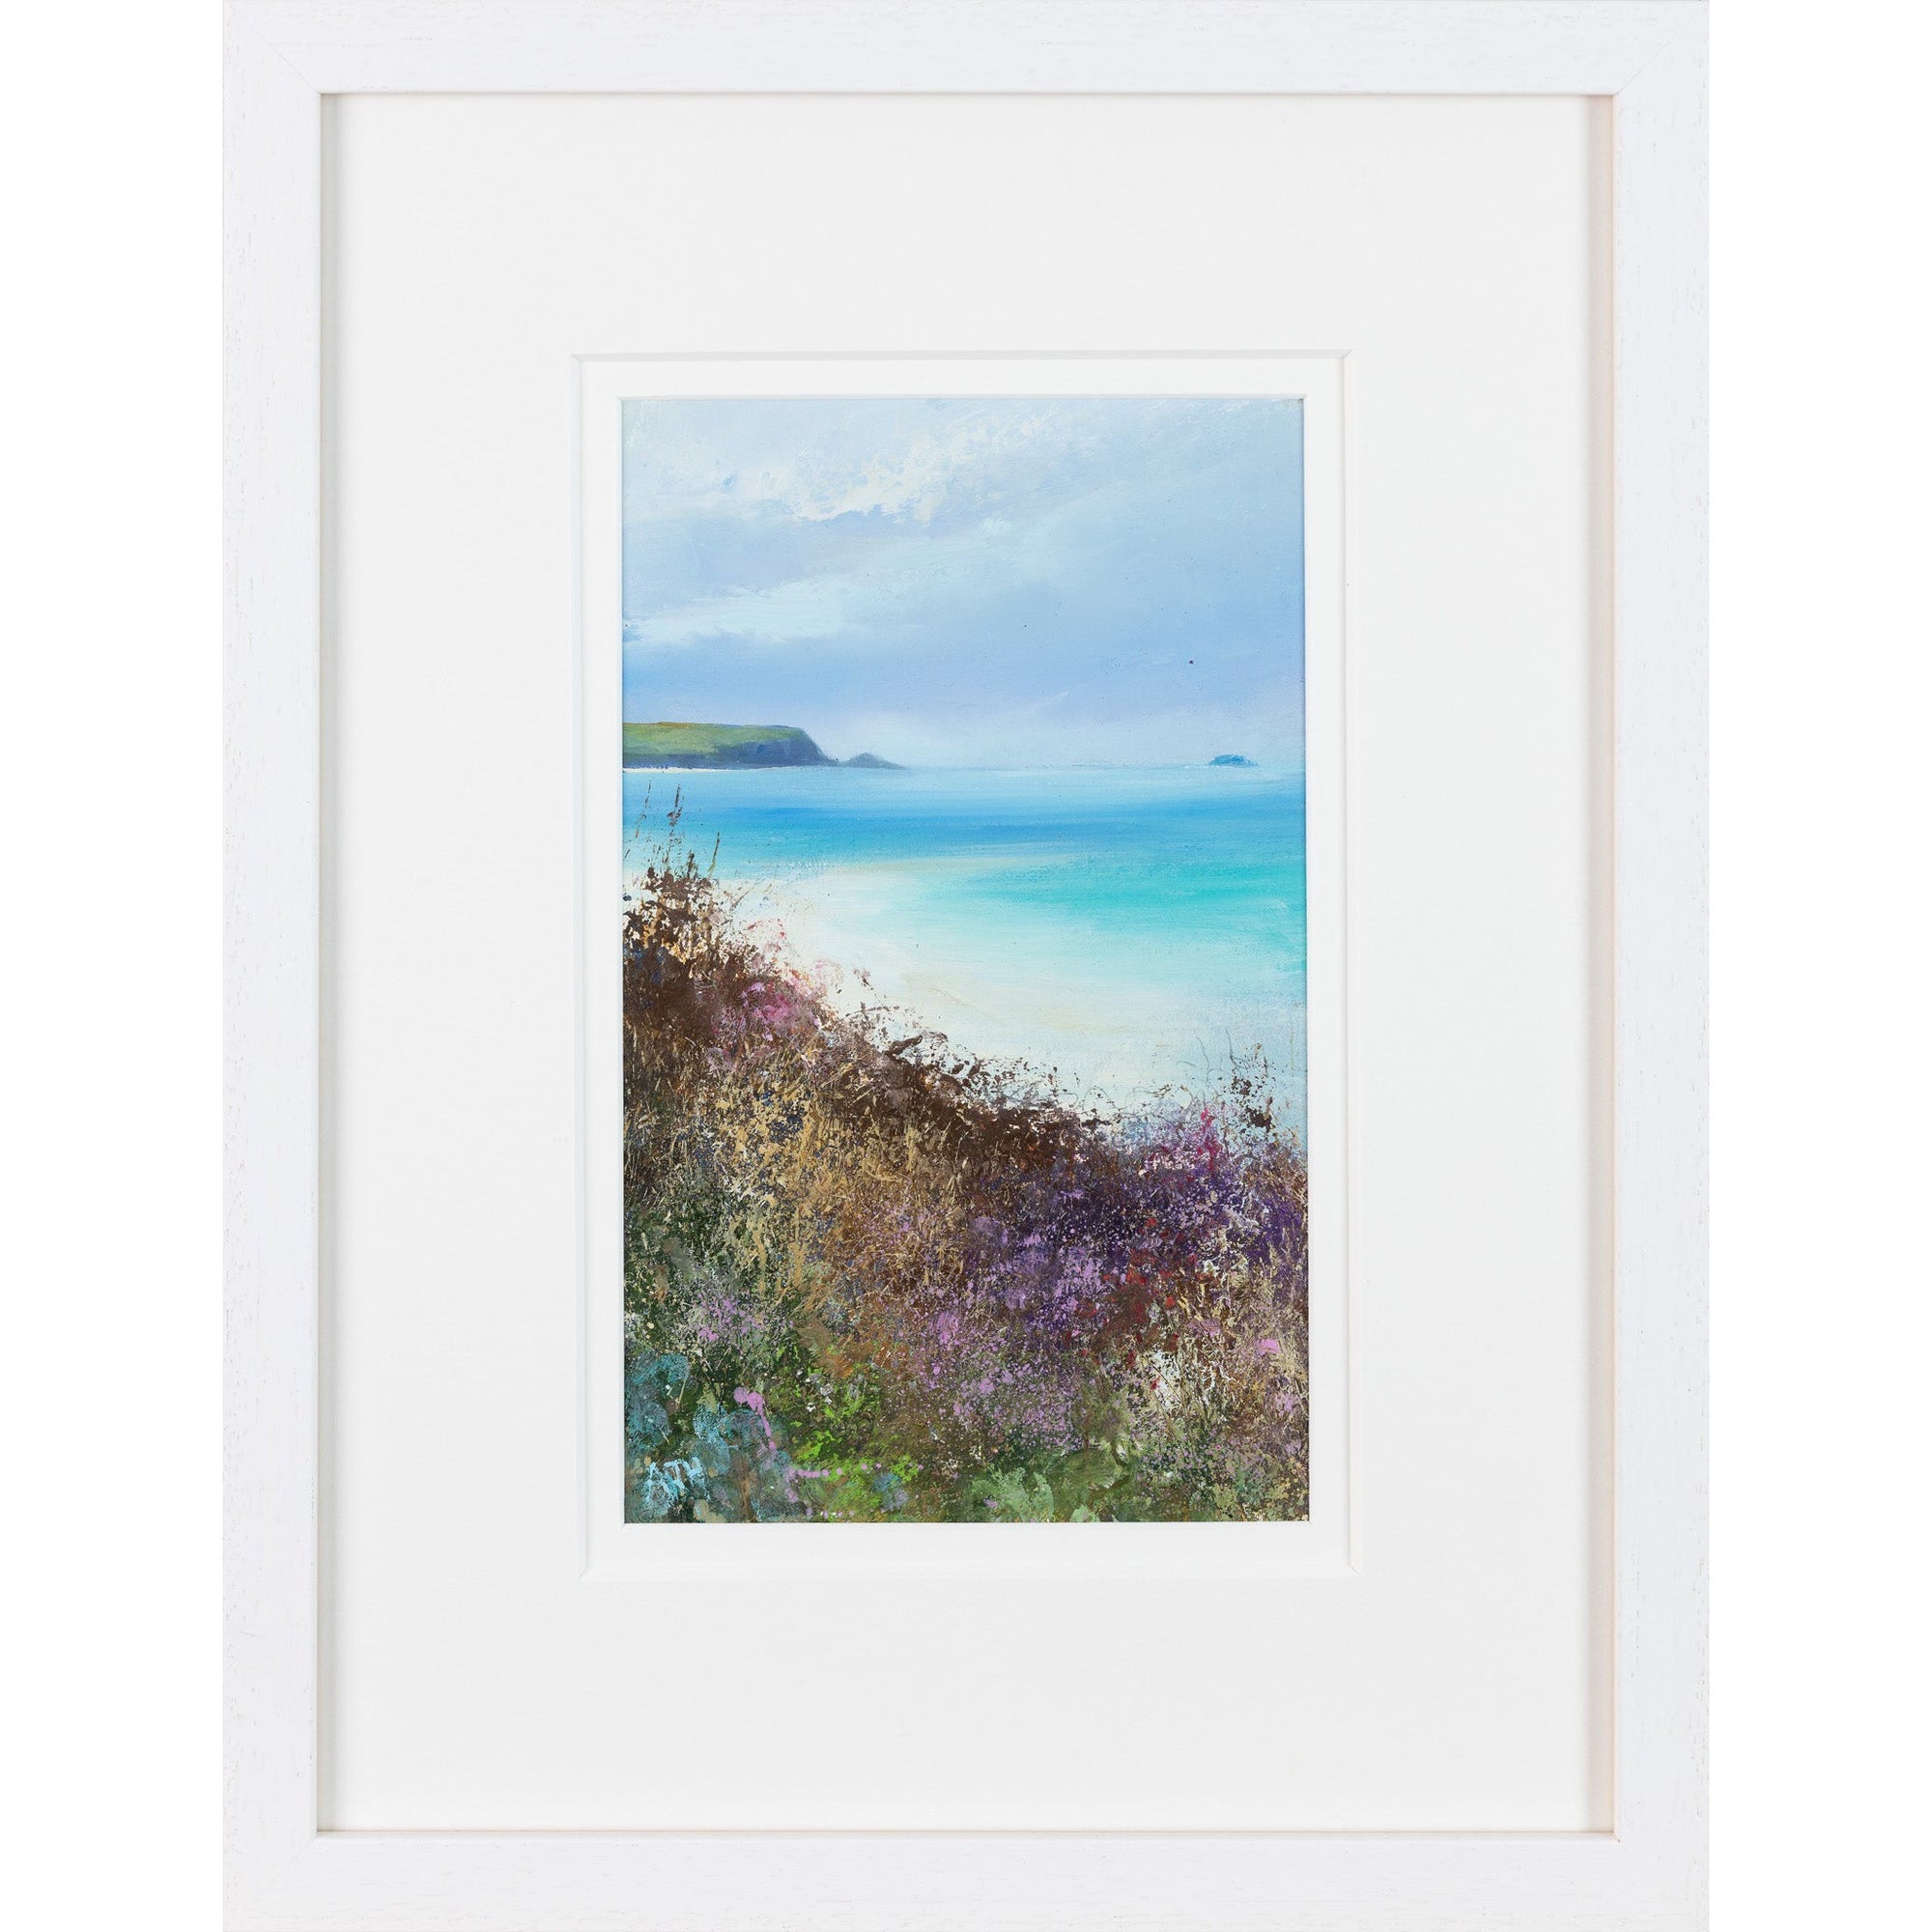 'Warm Autumn Colours, Daymer Bay' oil on paper original by Amanda Hoskin, available at Padstow Gallery, Cornwall